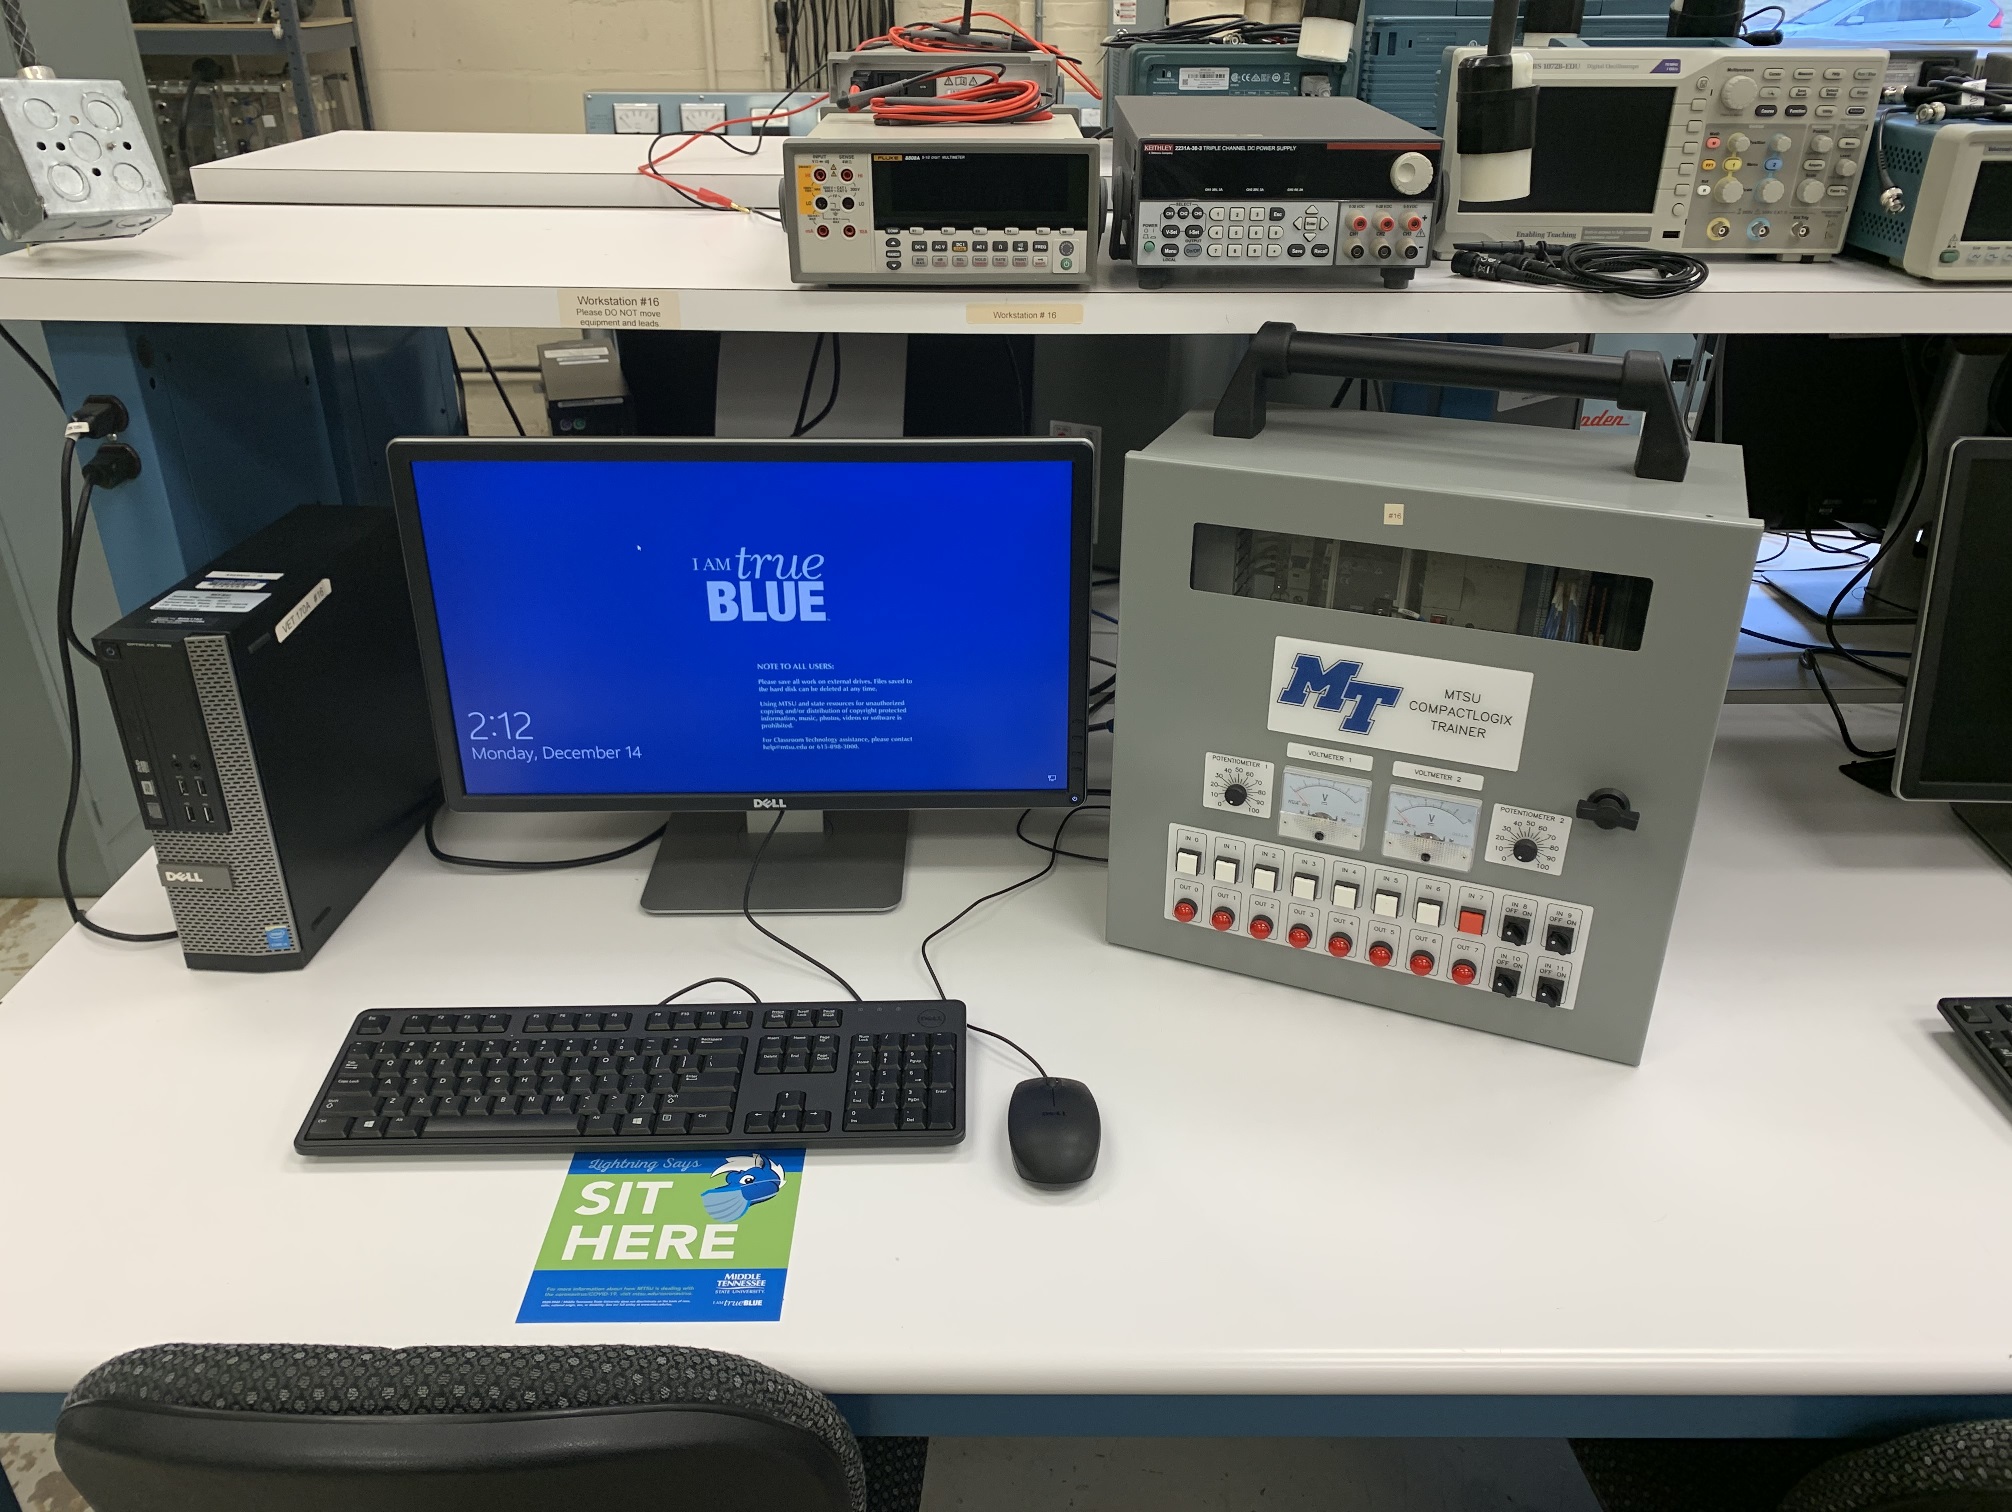 This is an image of the Power Lab Desk.